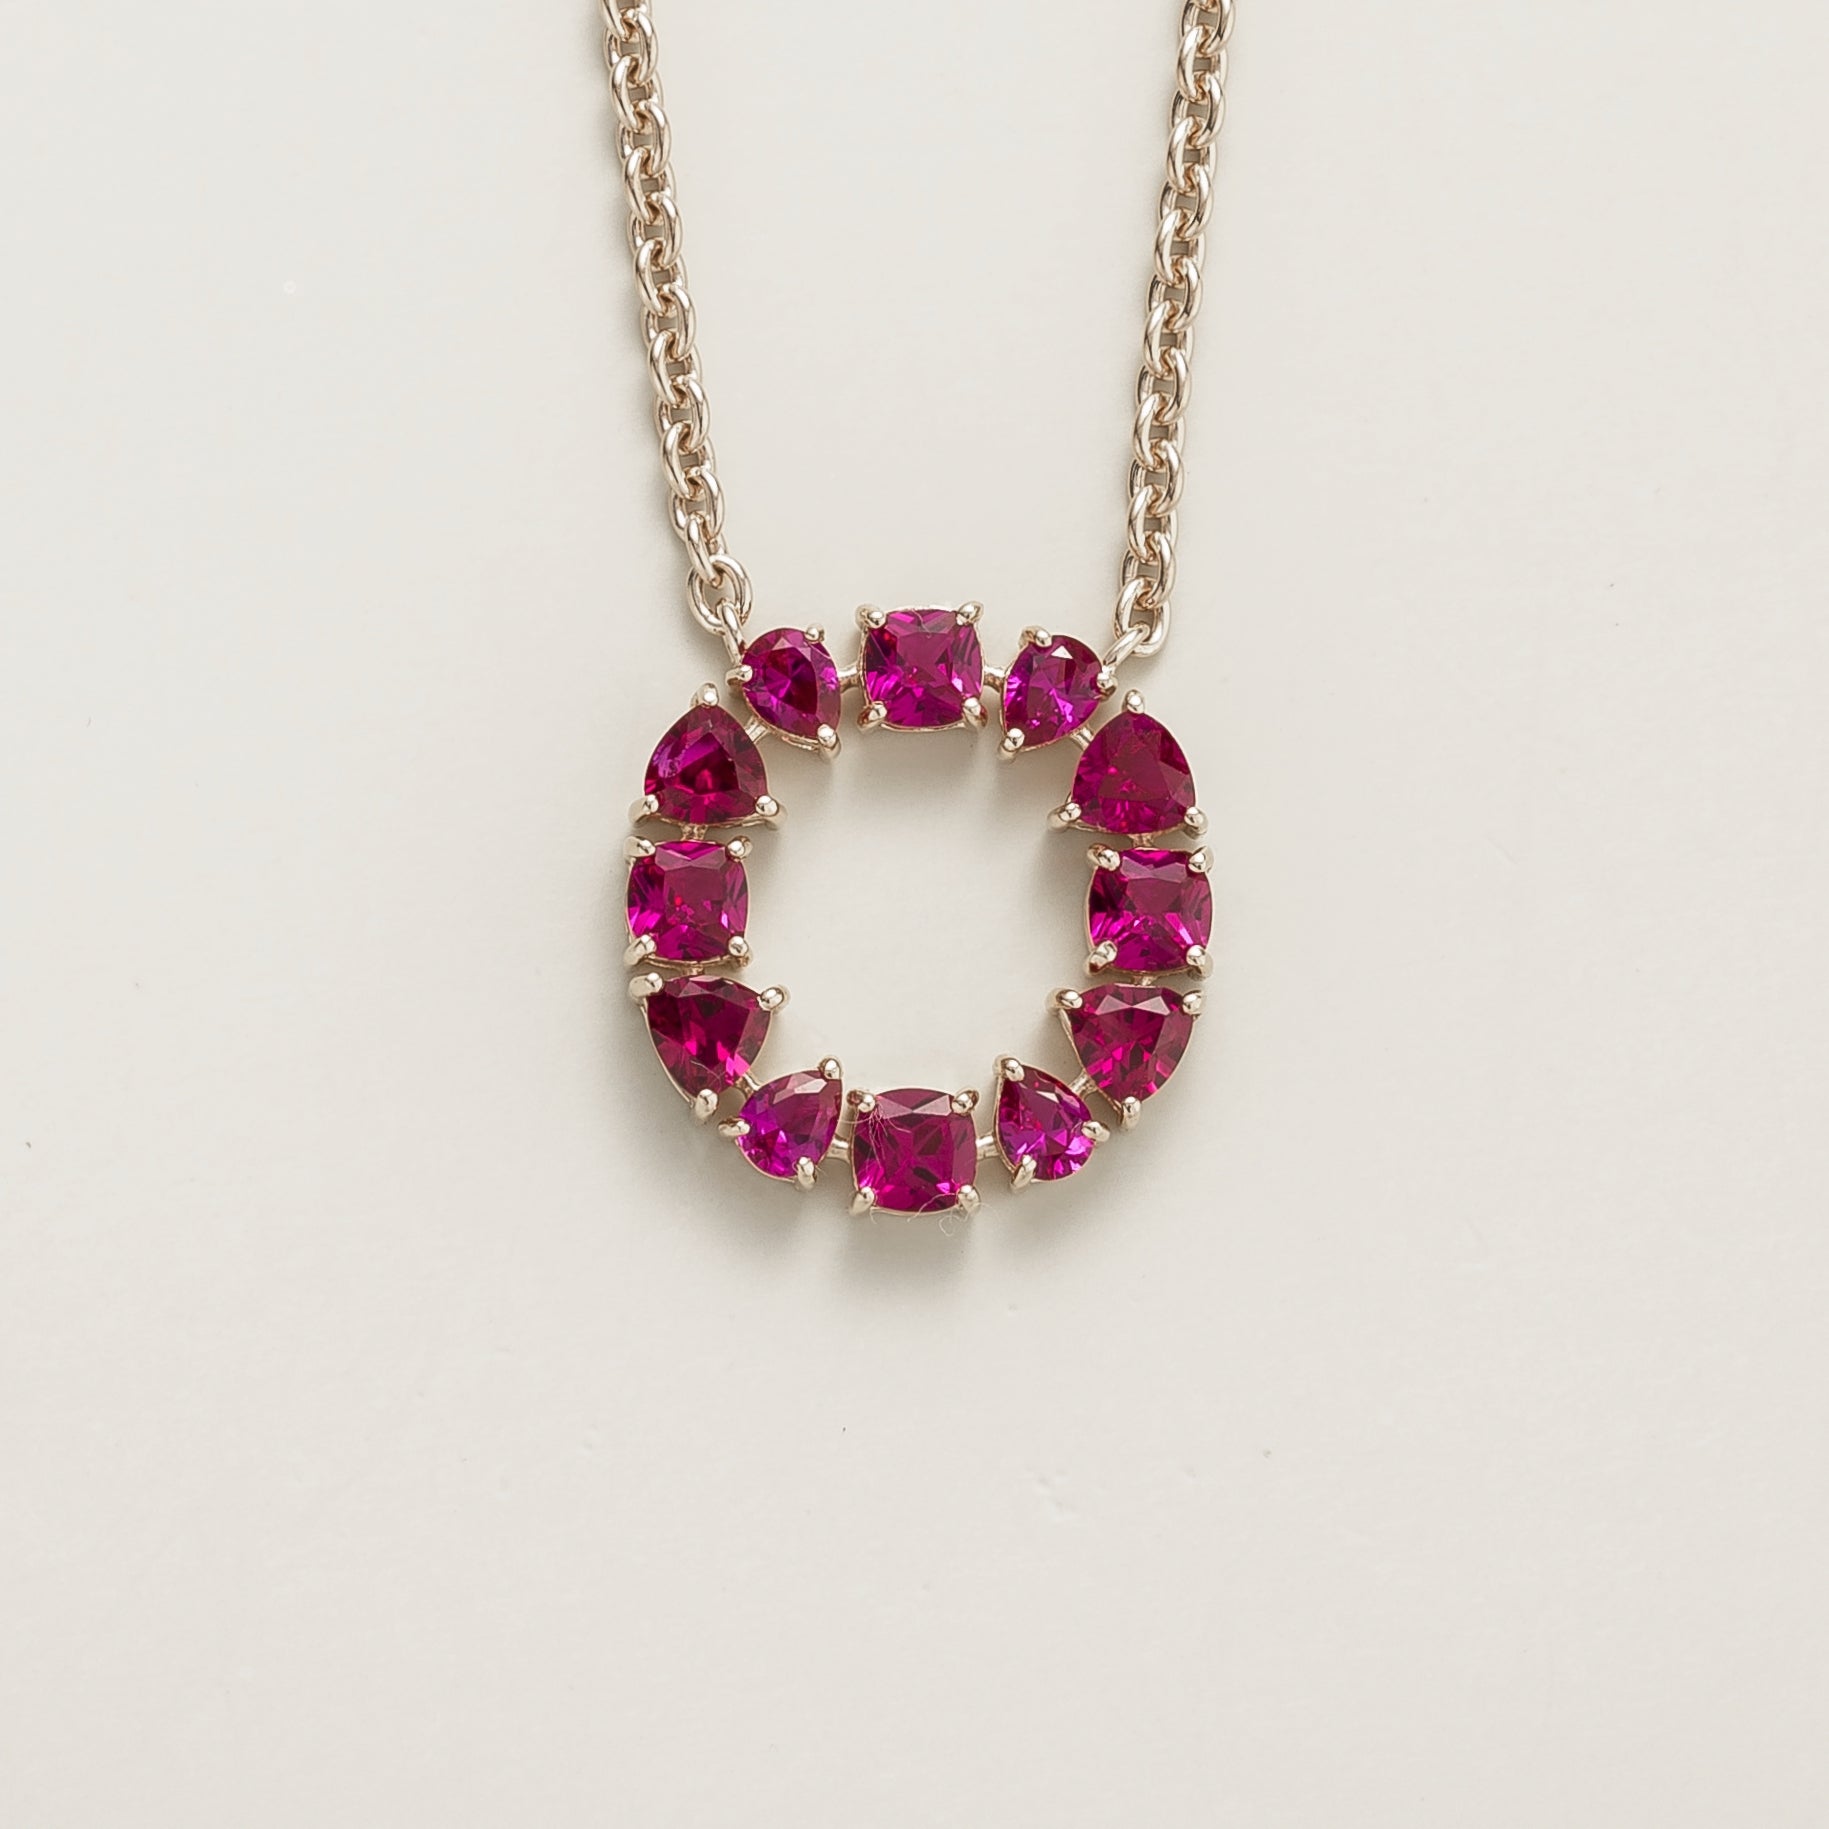 Ruby Necklace Juvetti Jewellery London Glorie White Gold Necklace Set With Ruby